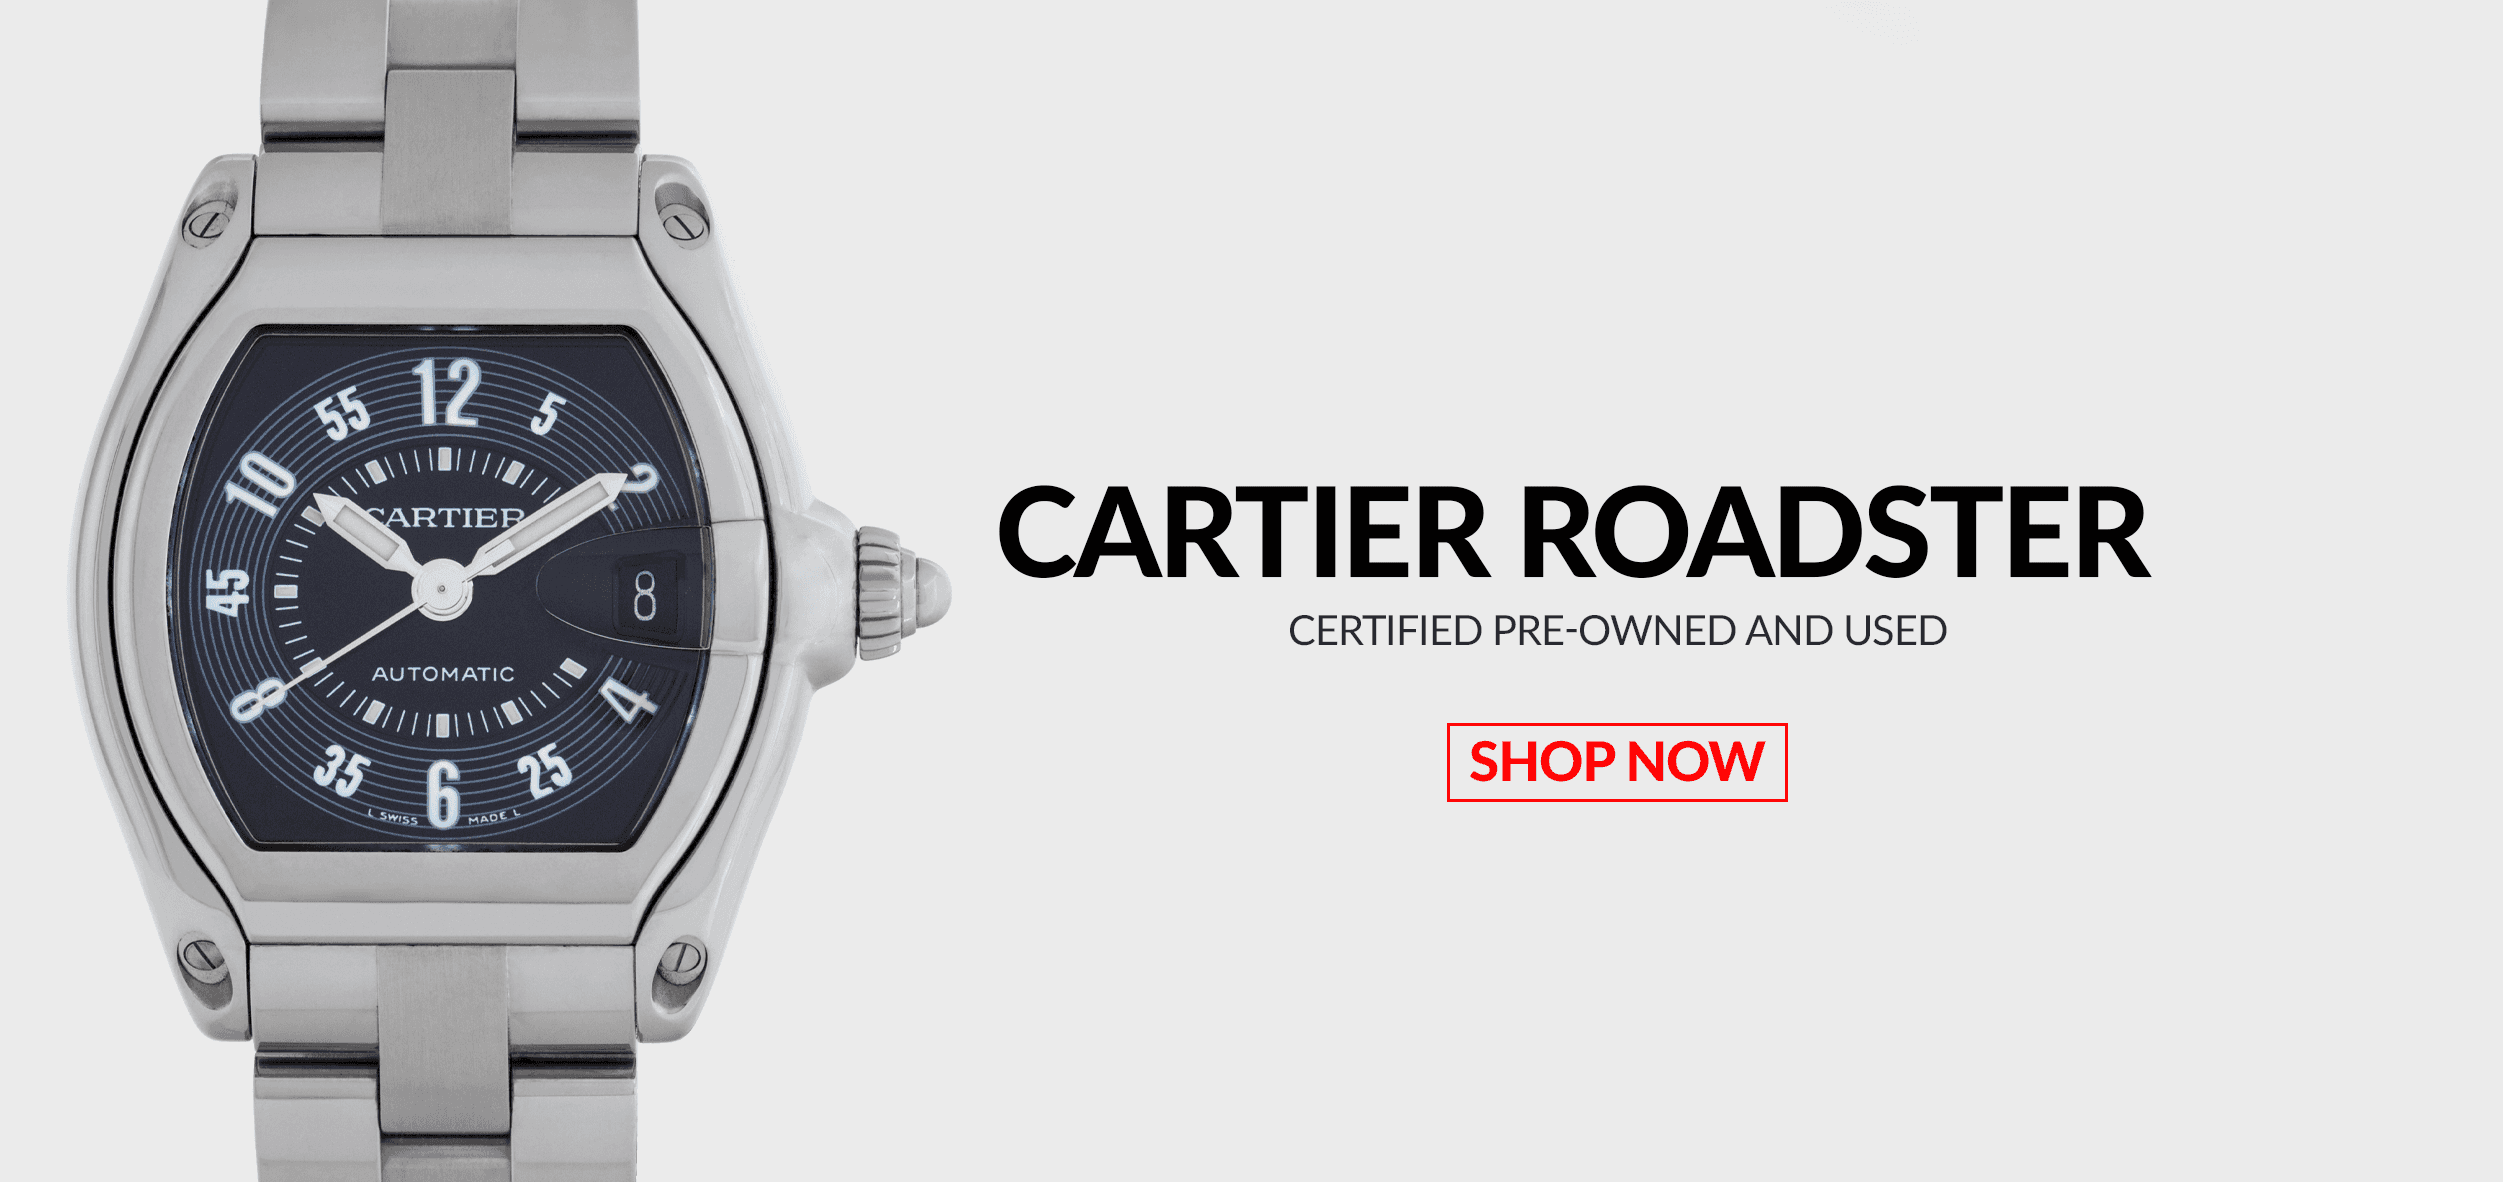 Pre-Owned Certified Used Cartier Roadster Header